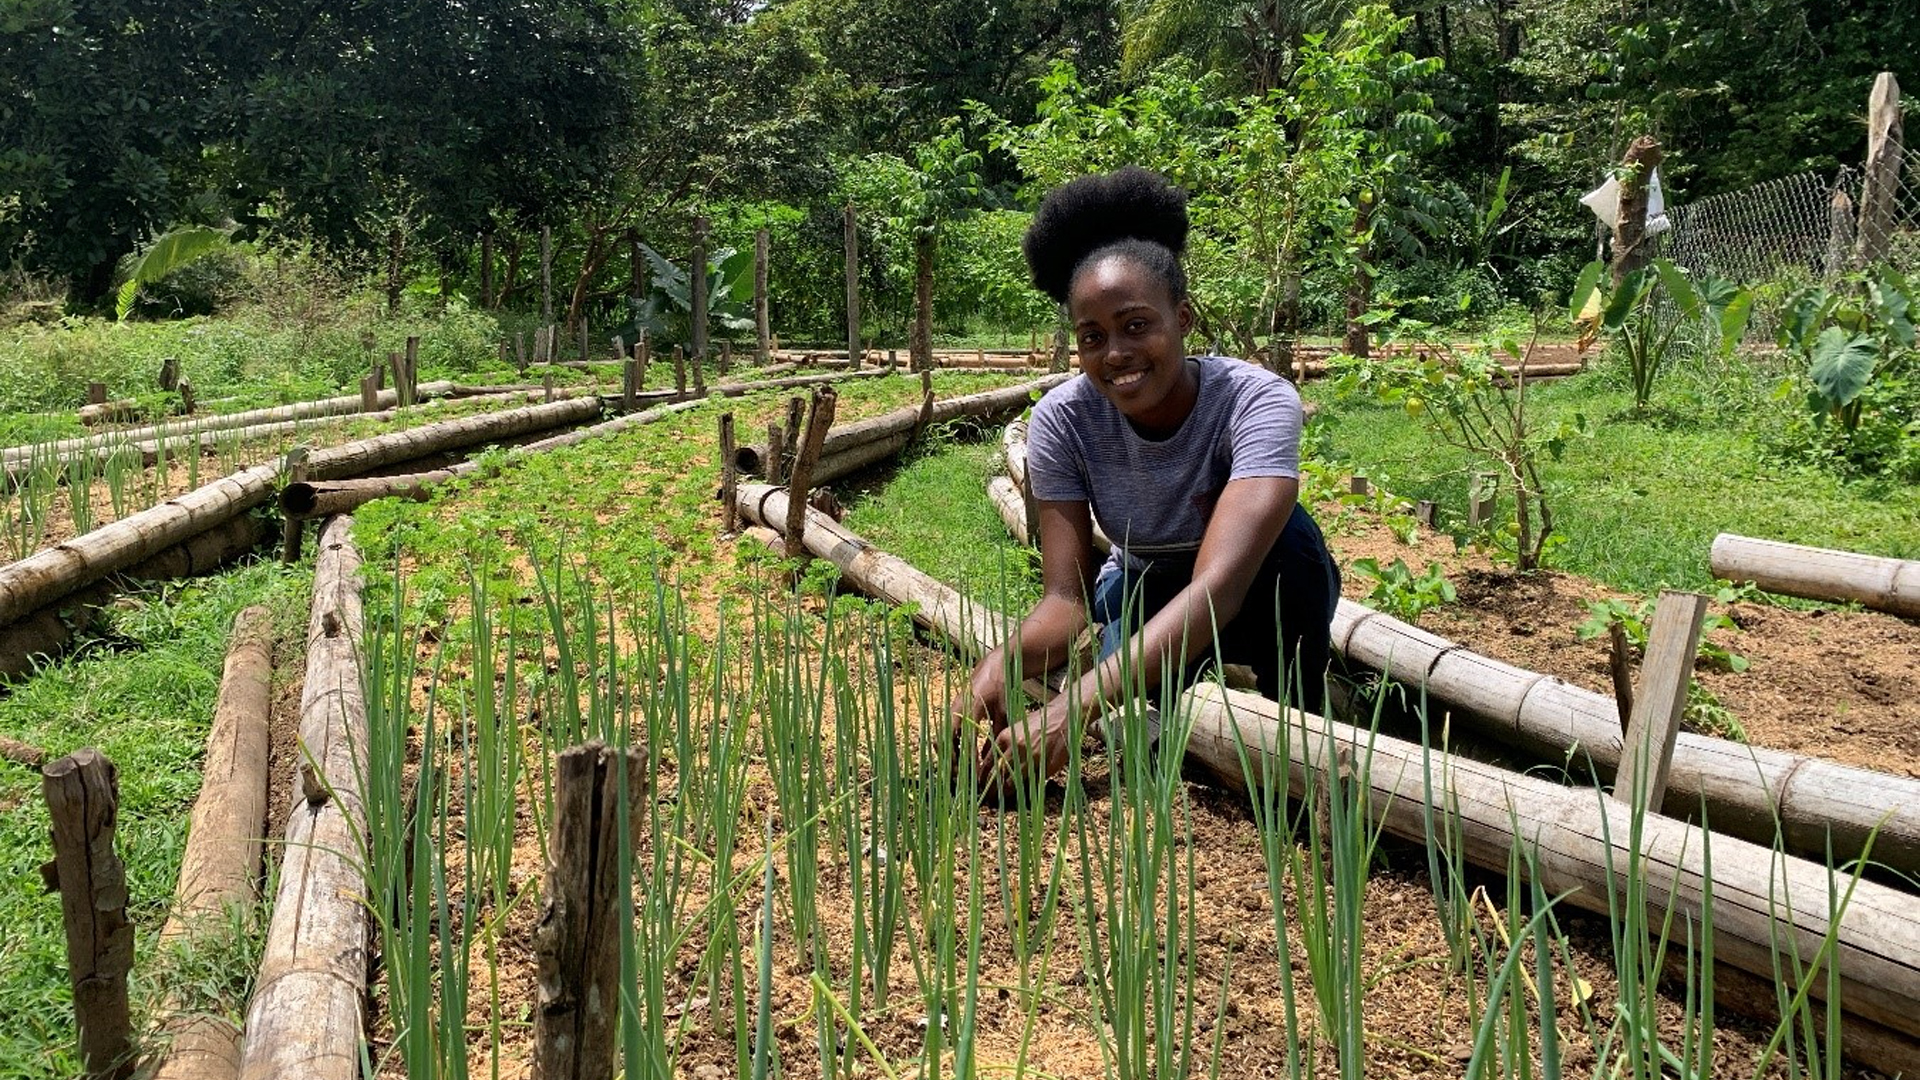 Meet The Zambian Entrepreneur Working To Combat Climate Change Through Her Mobile Aquaponics Project